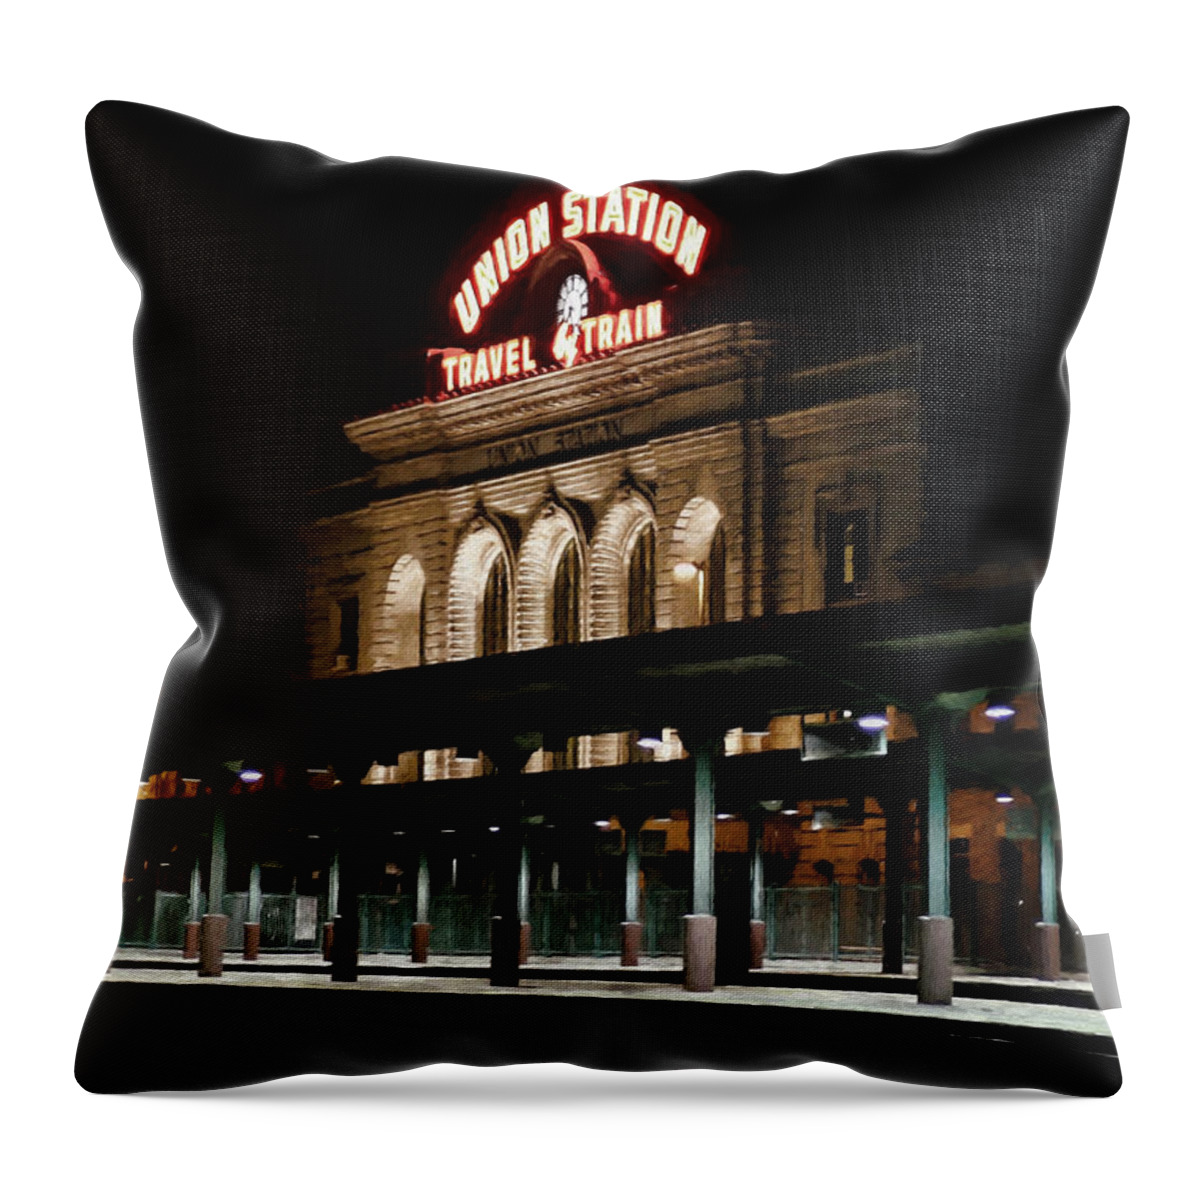 Union Station Throw Pillow featuring the photograph Union Station Denver Colorado by Ken Smith